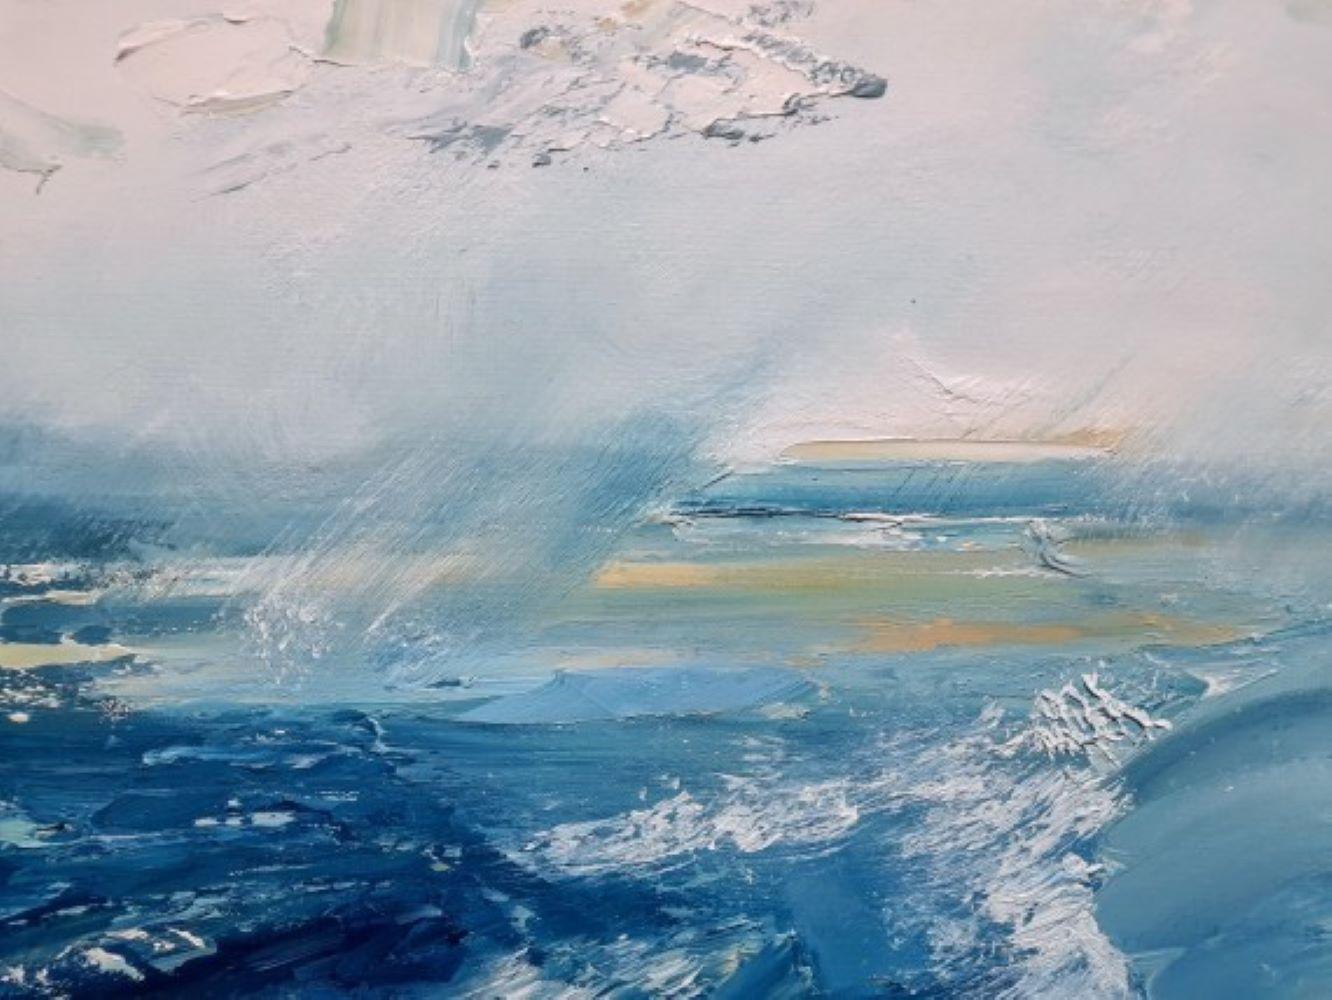 Passing Storm, Original seascape and landsacpe painting  - Gray Landscape Painting by Georgie Dowling